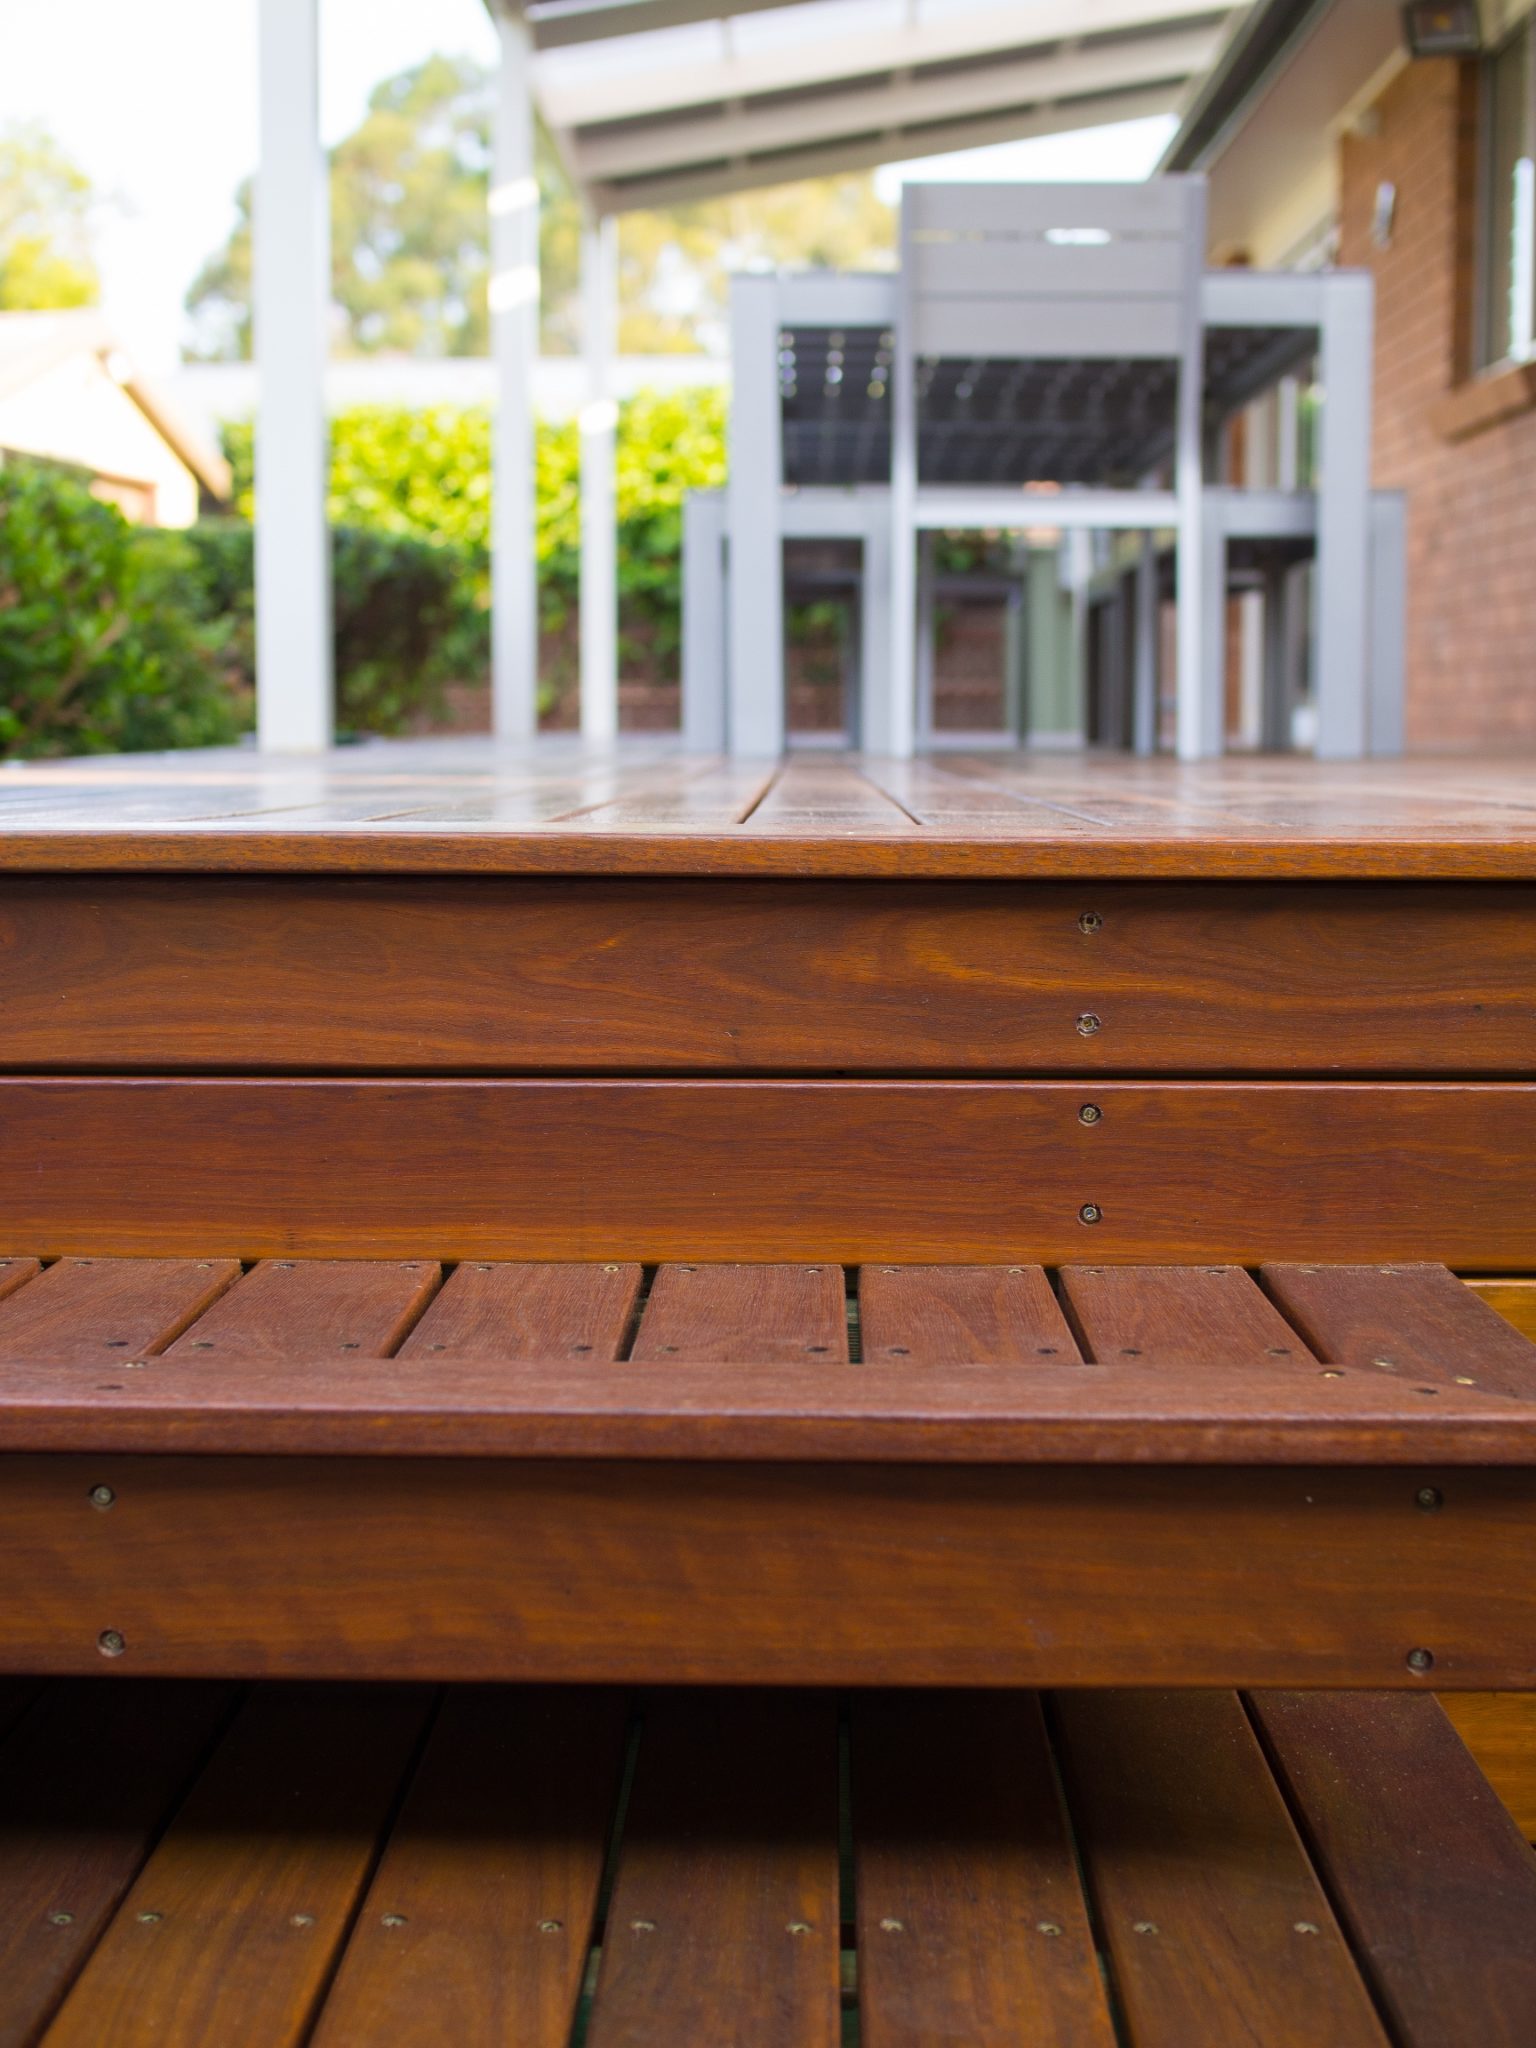 How to: Protect your exterior timber during winter